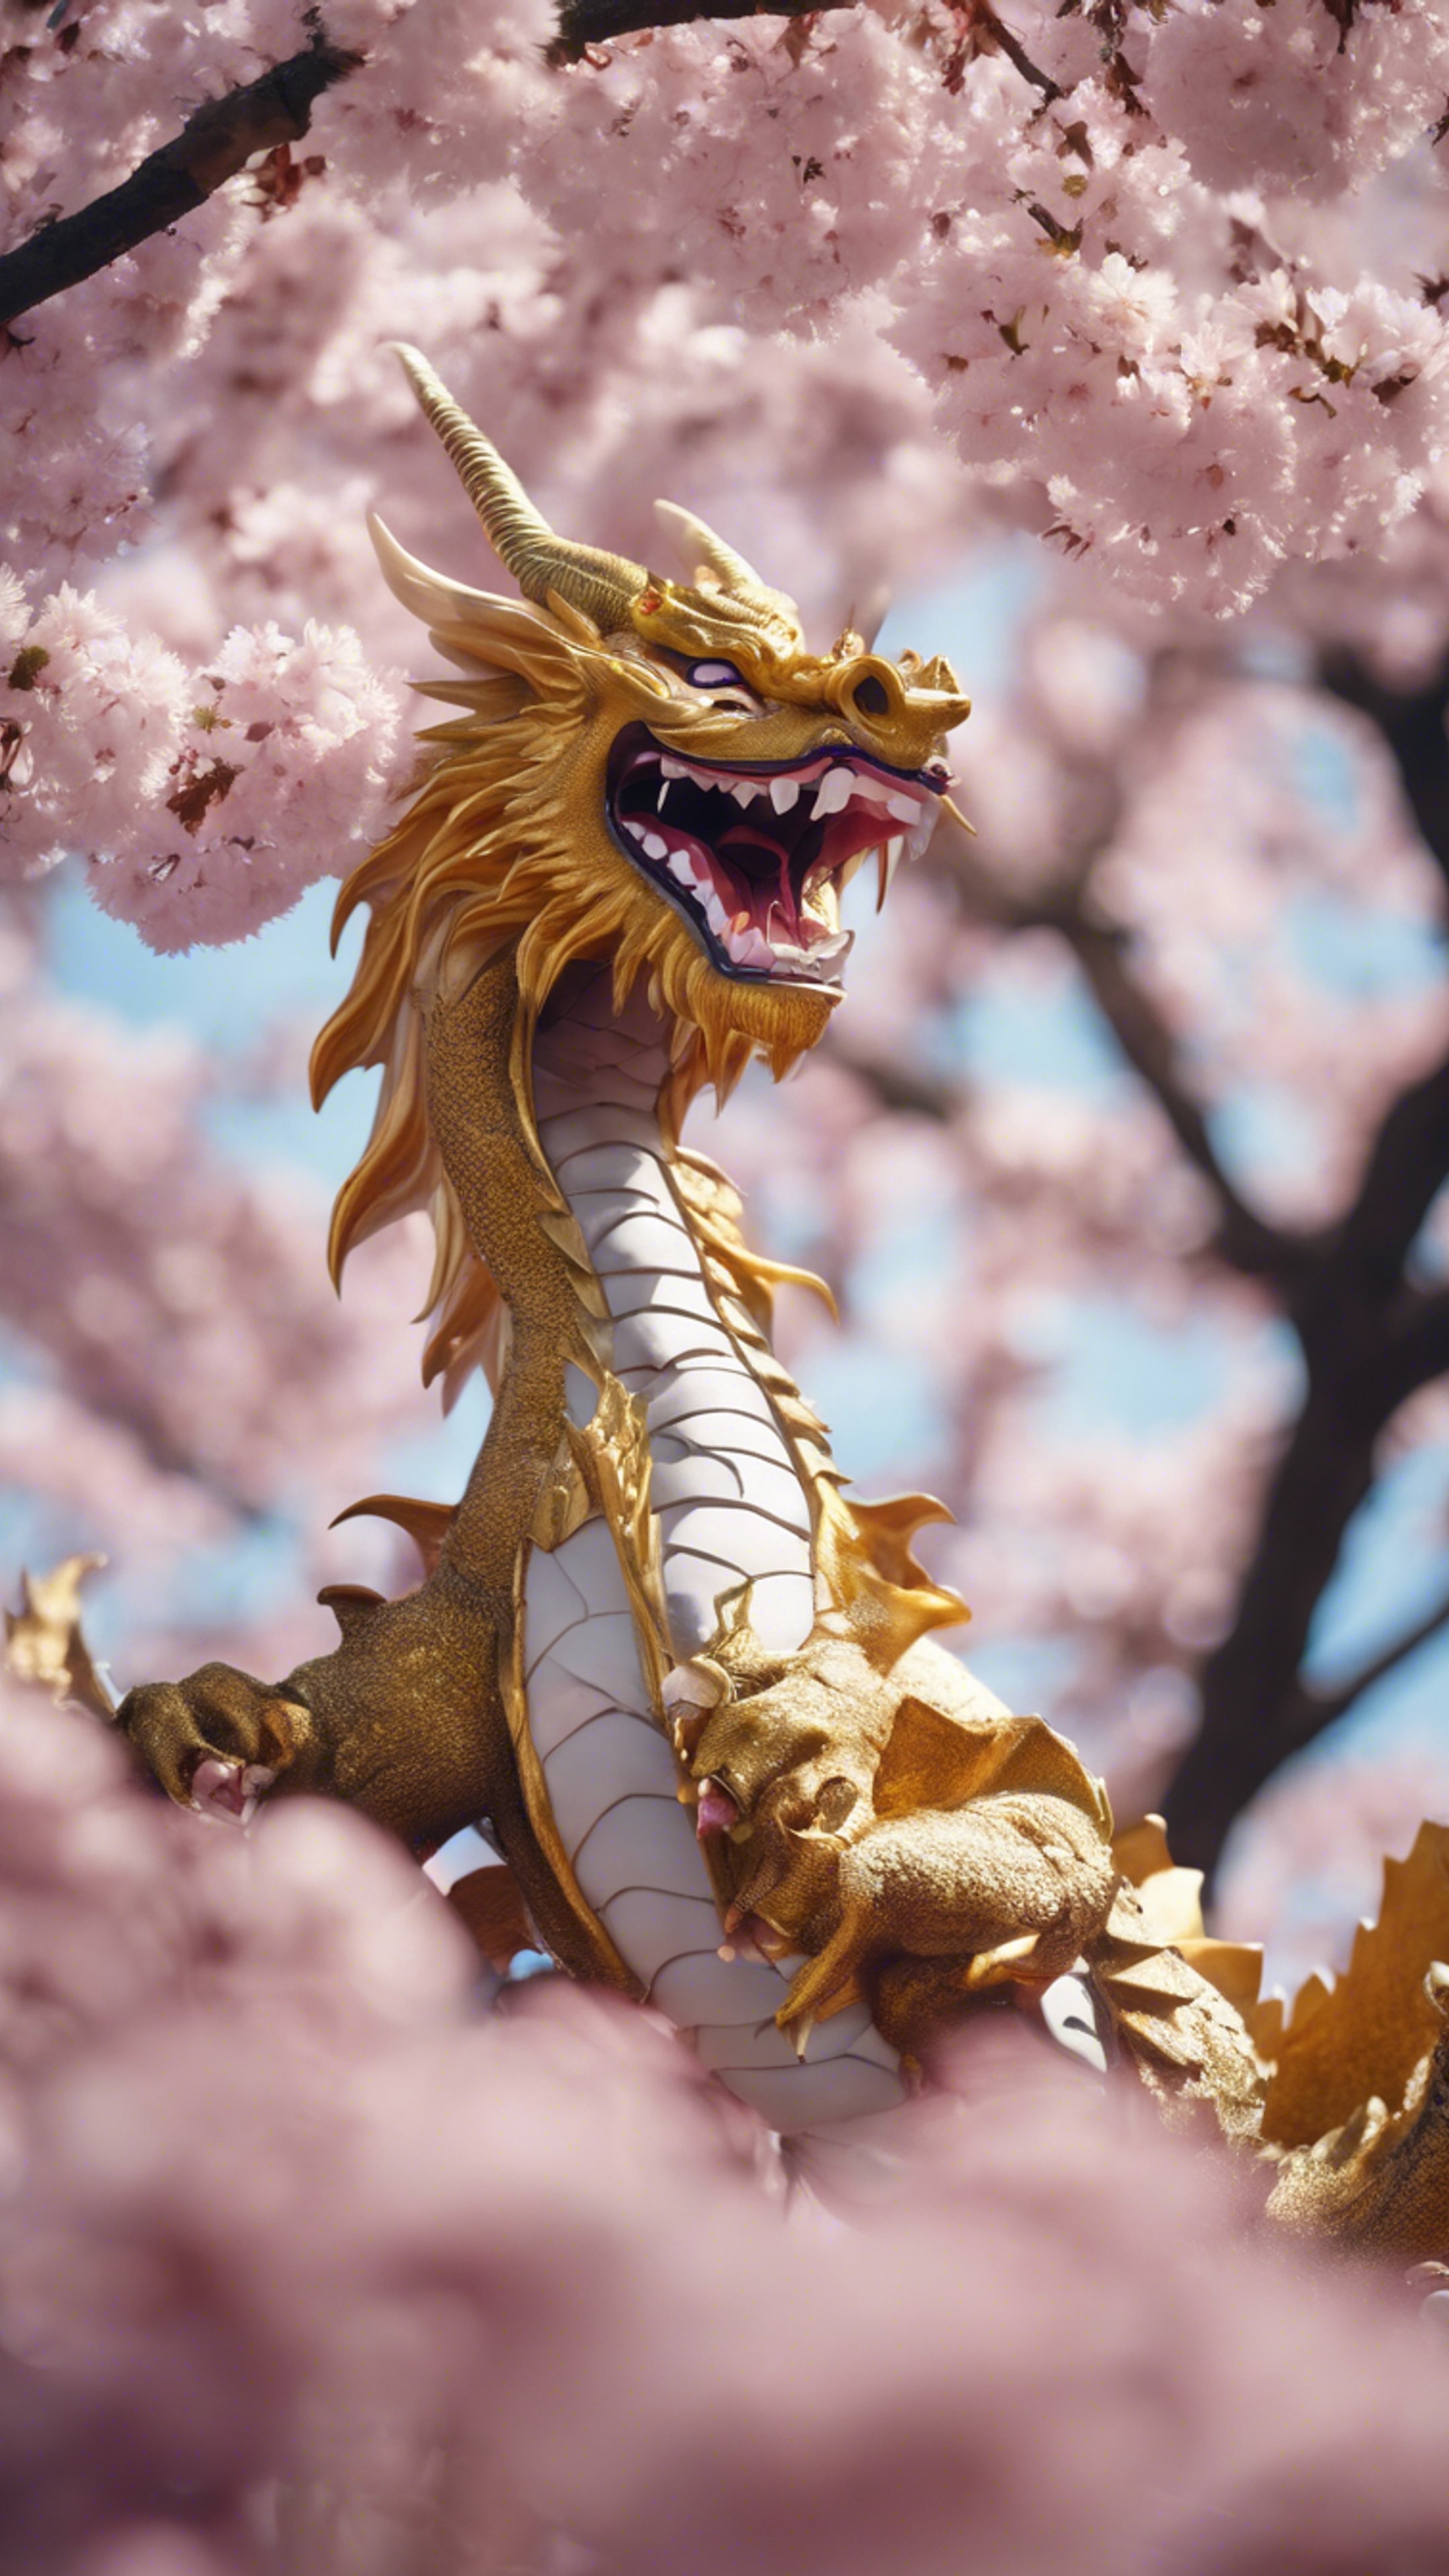 A playful Japanese dragon frolicking in the cherry blossom festival.壁紙[dfac1438ceb04769bc5b]